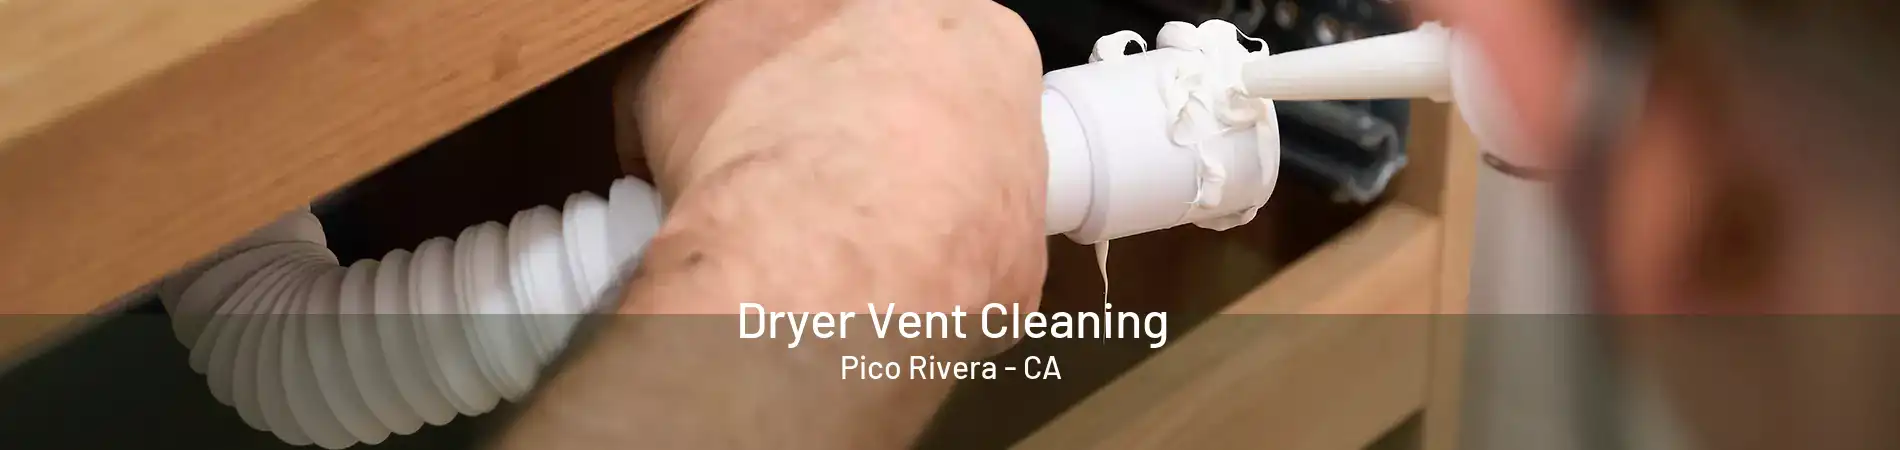 Dryer Vent Cleaning Pico Rivera - CA